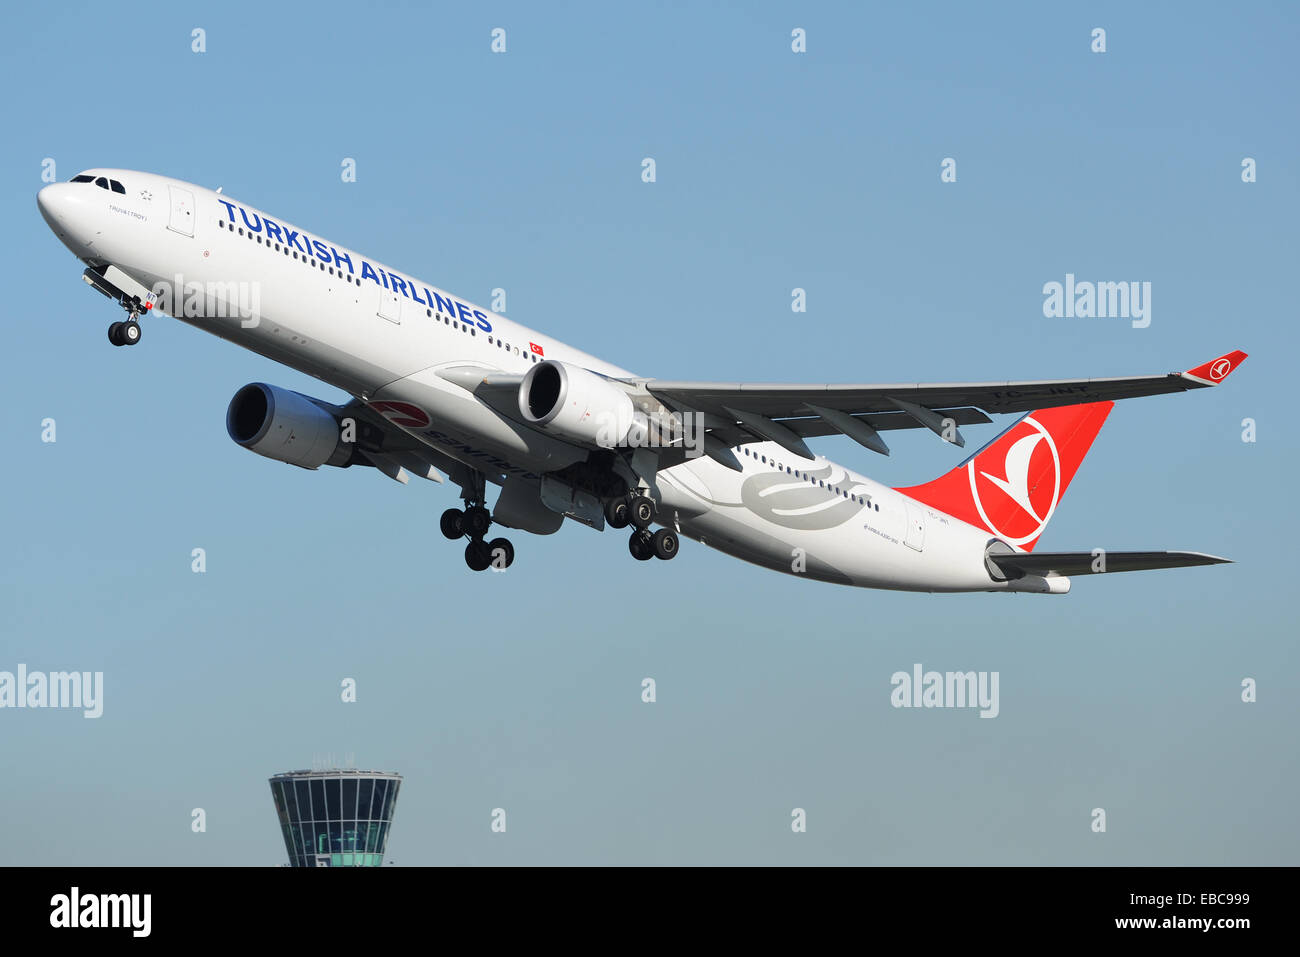 Turkish Airlines Airbus A330-300 at London Heathrow Airport Stock Photo